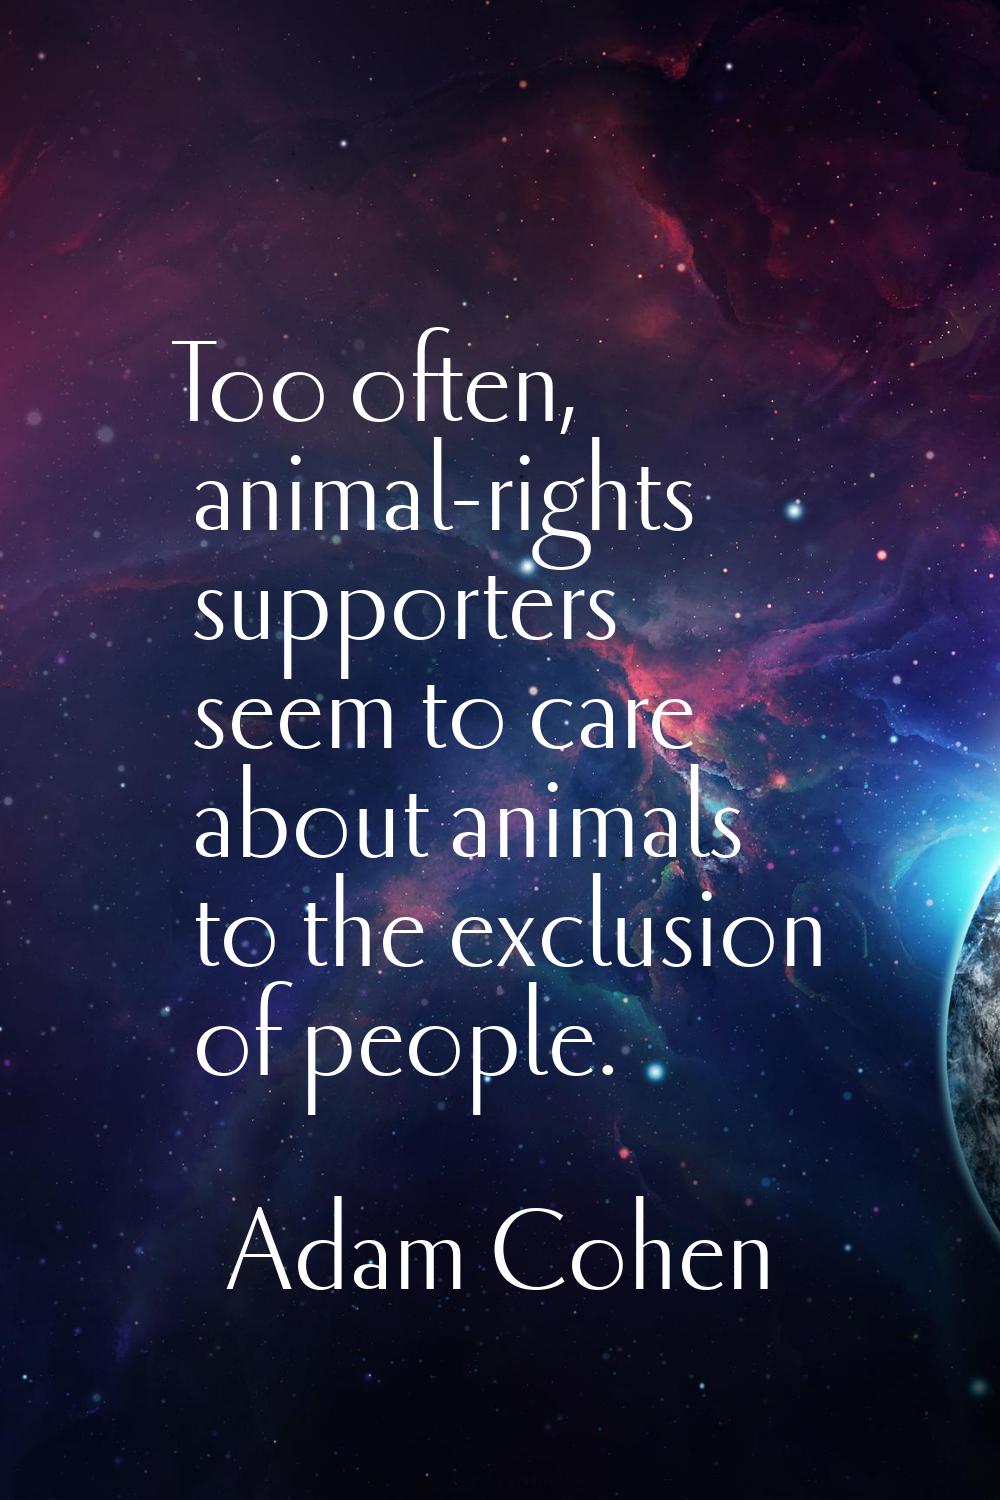 Too often, animal-rights supporters seem to care about animals to the exclusion of people.